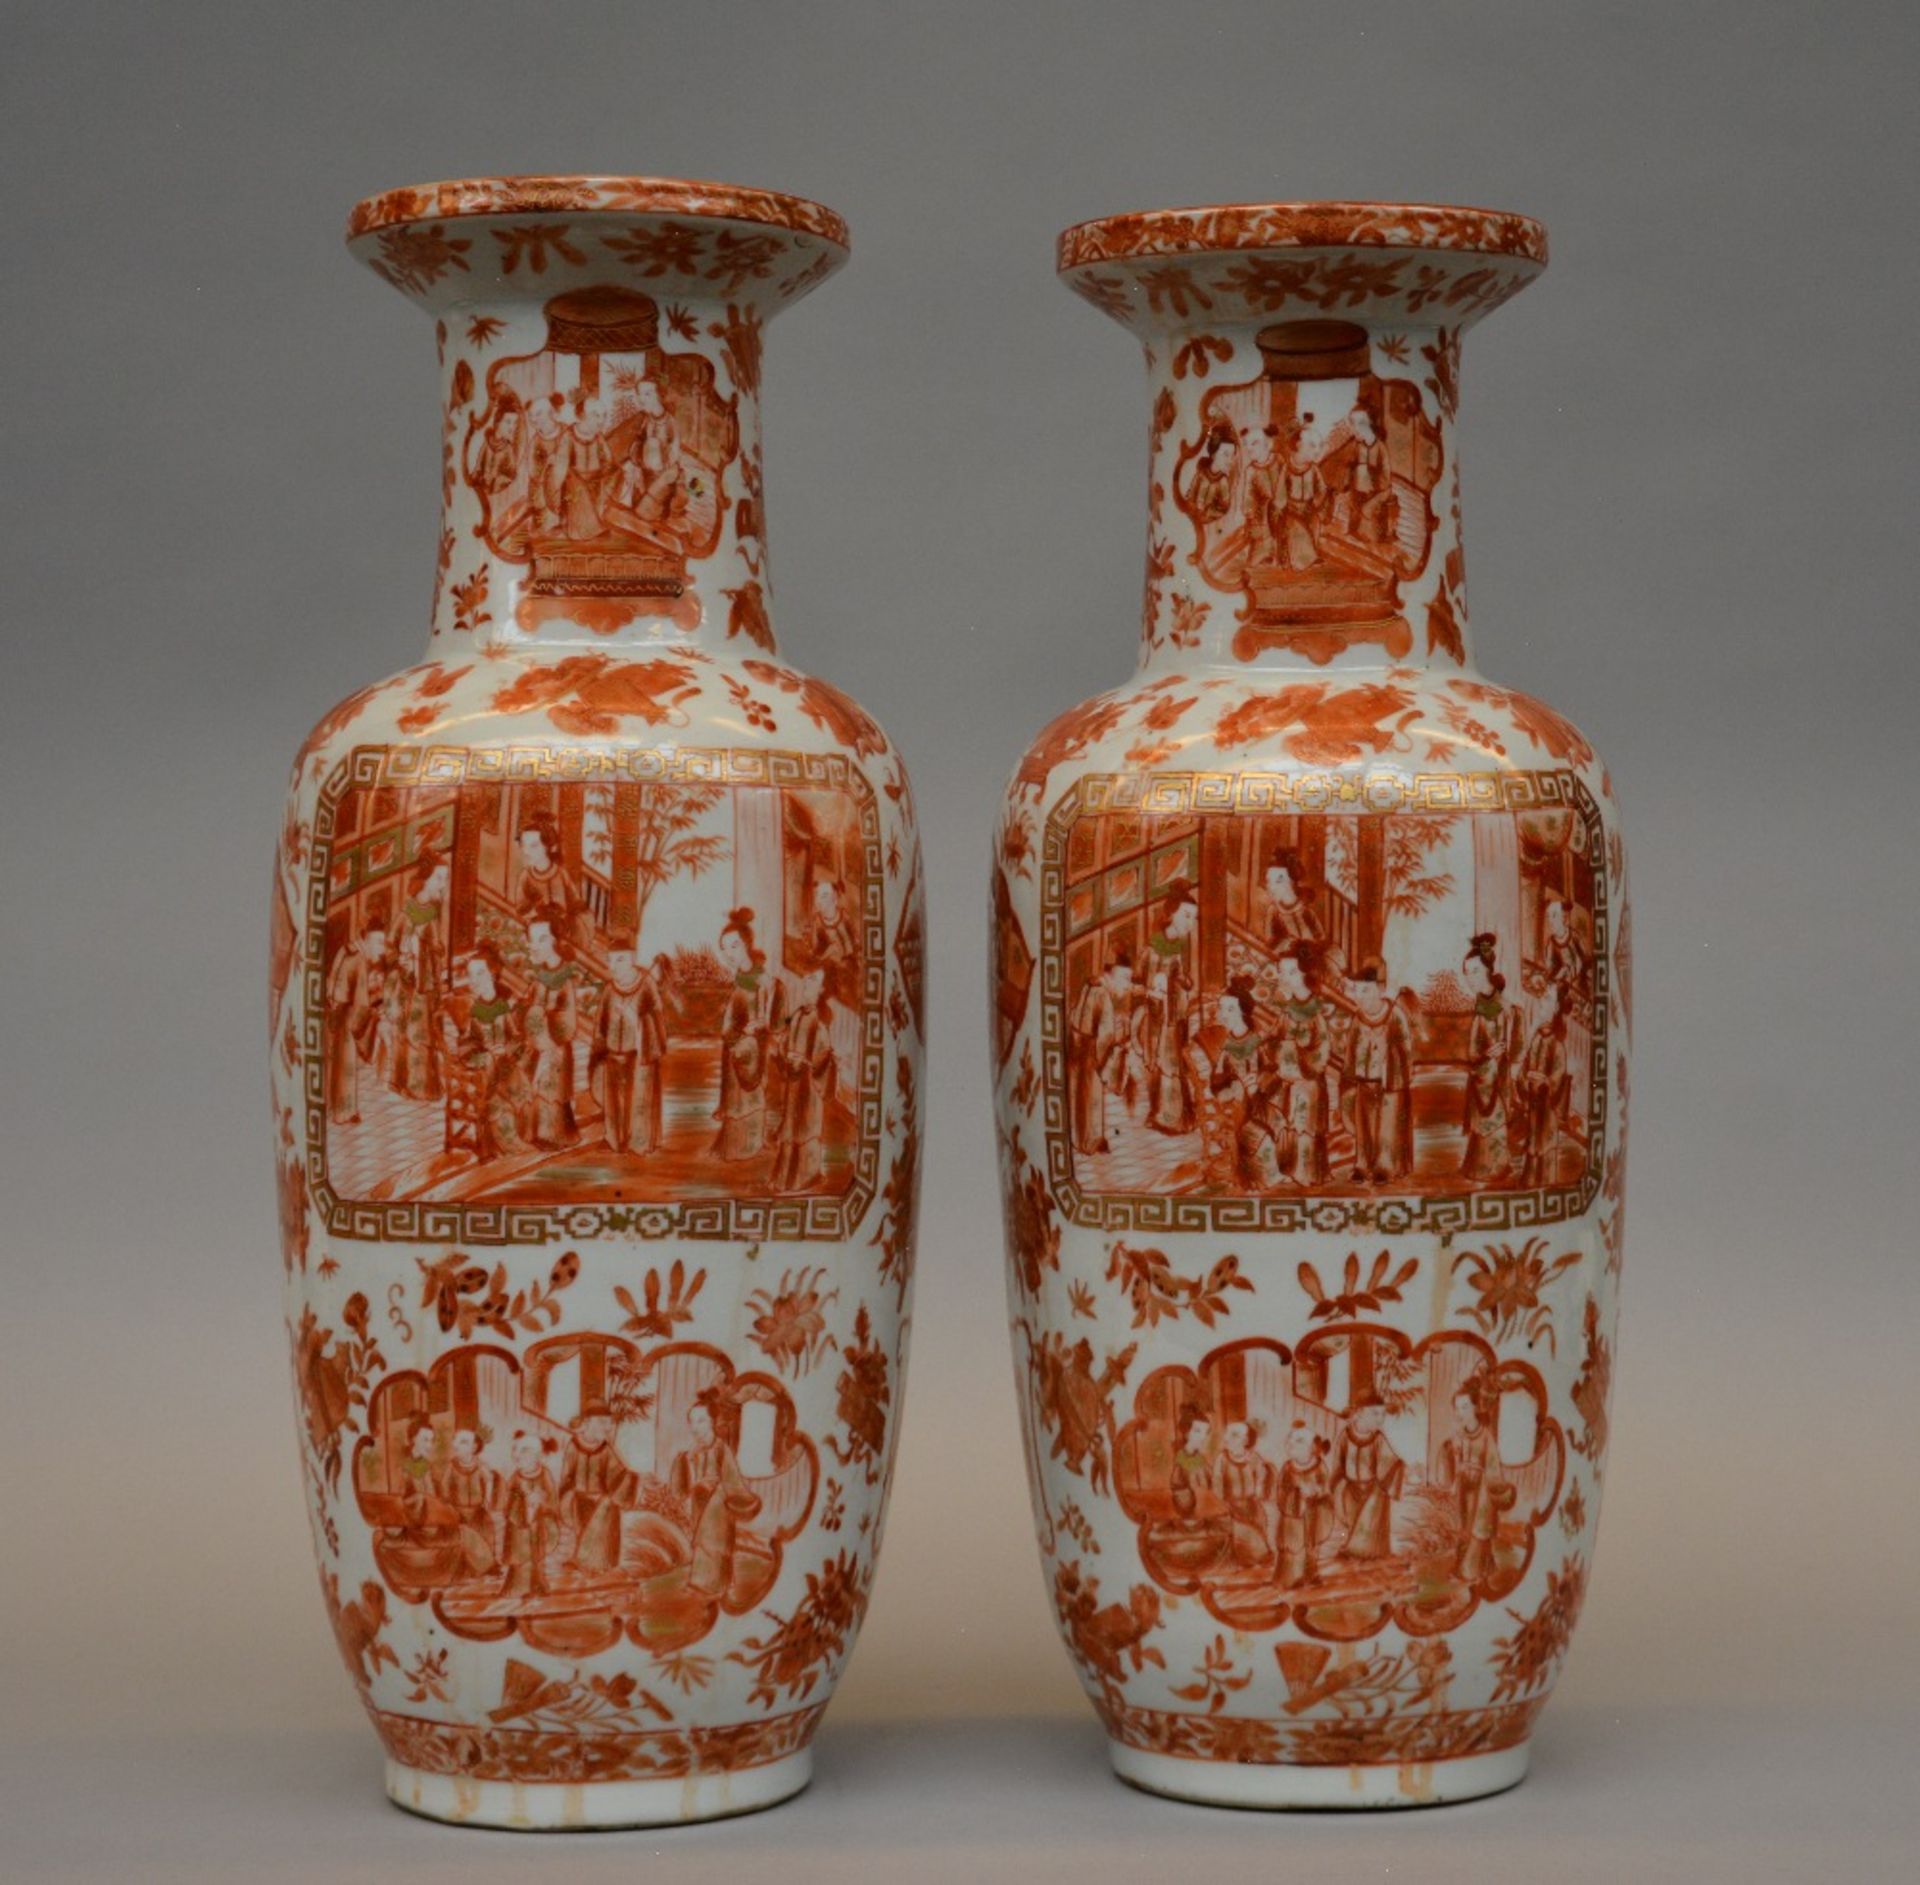 A pair of Chinese vases with iron-red upperglaze, painted with court scenes, first half of 19thC,